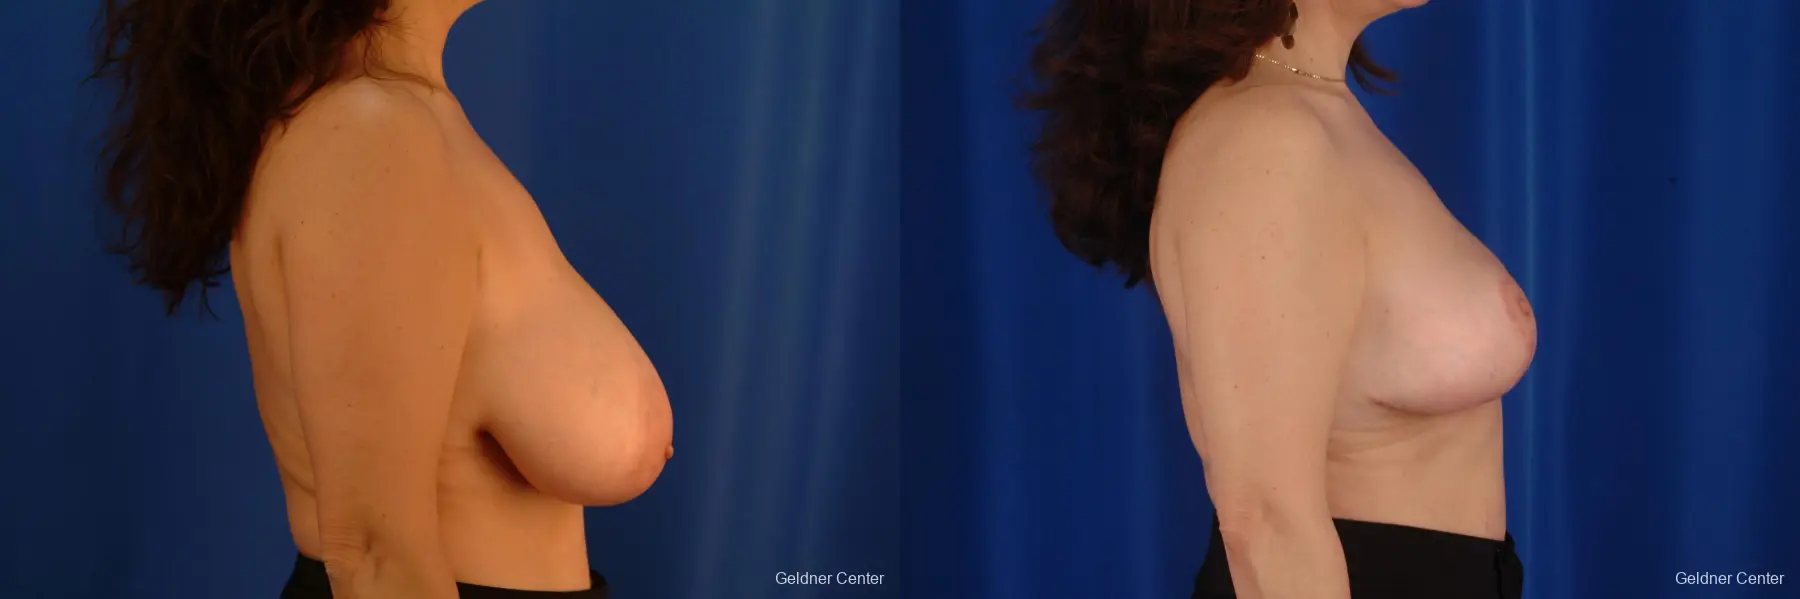 Breast Reduction Streeterville, Chicago 2289 - Before and After 2